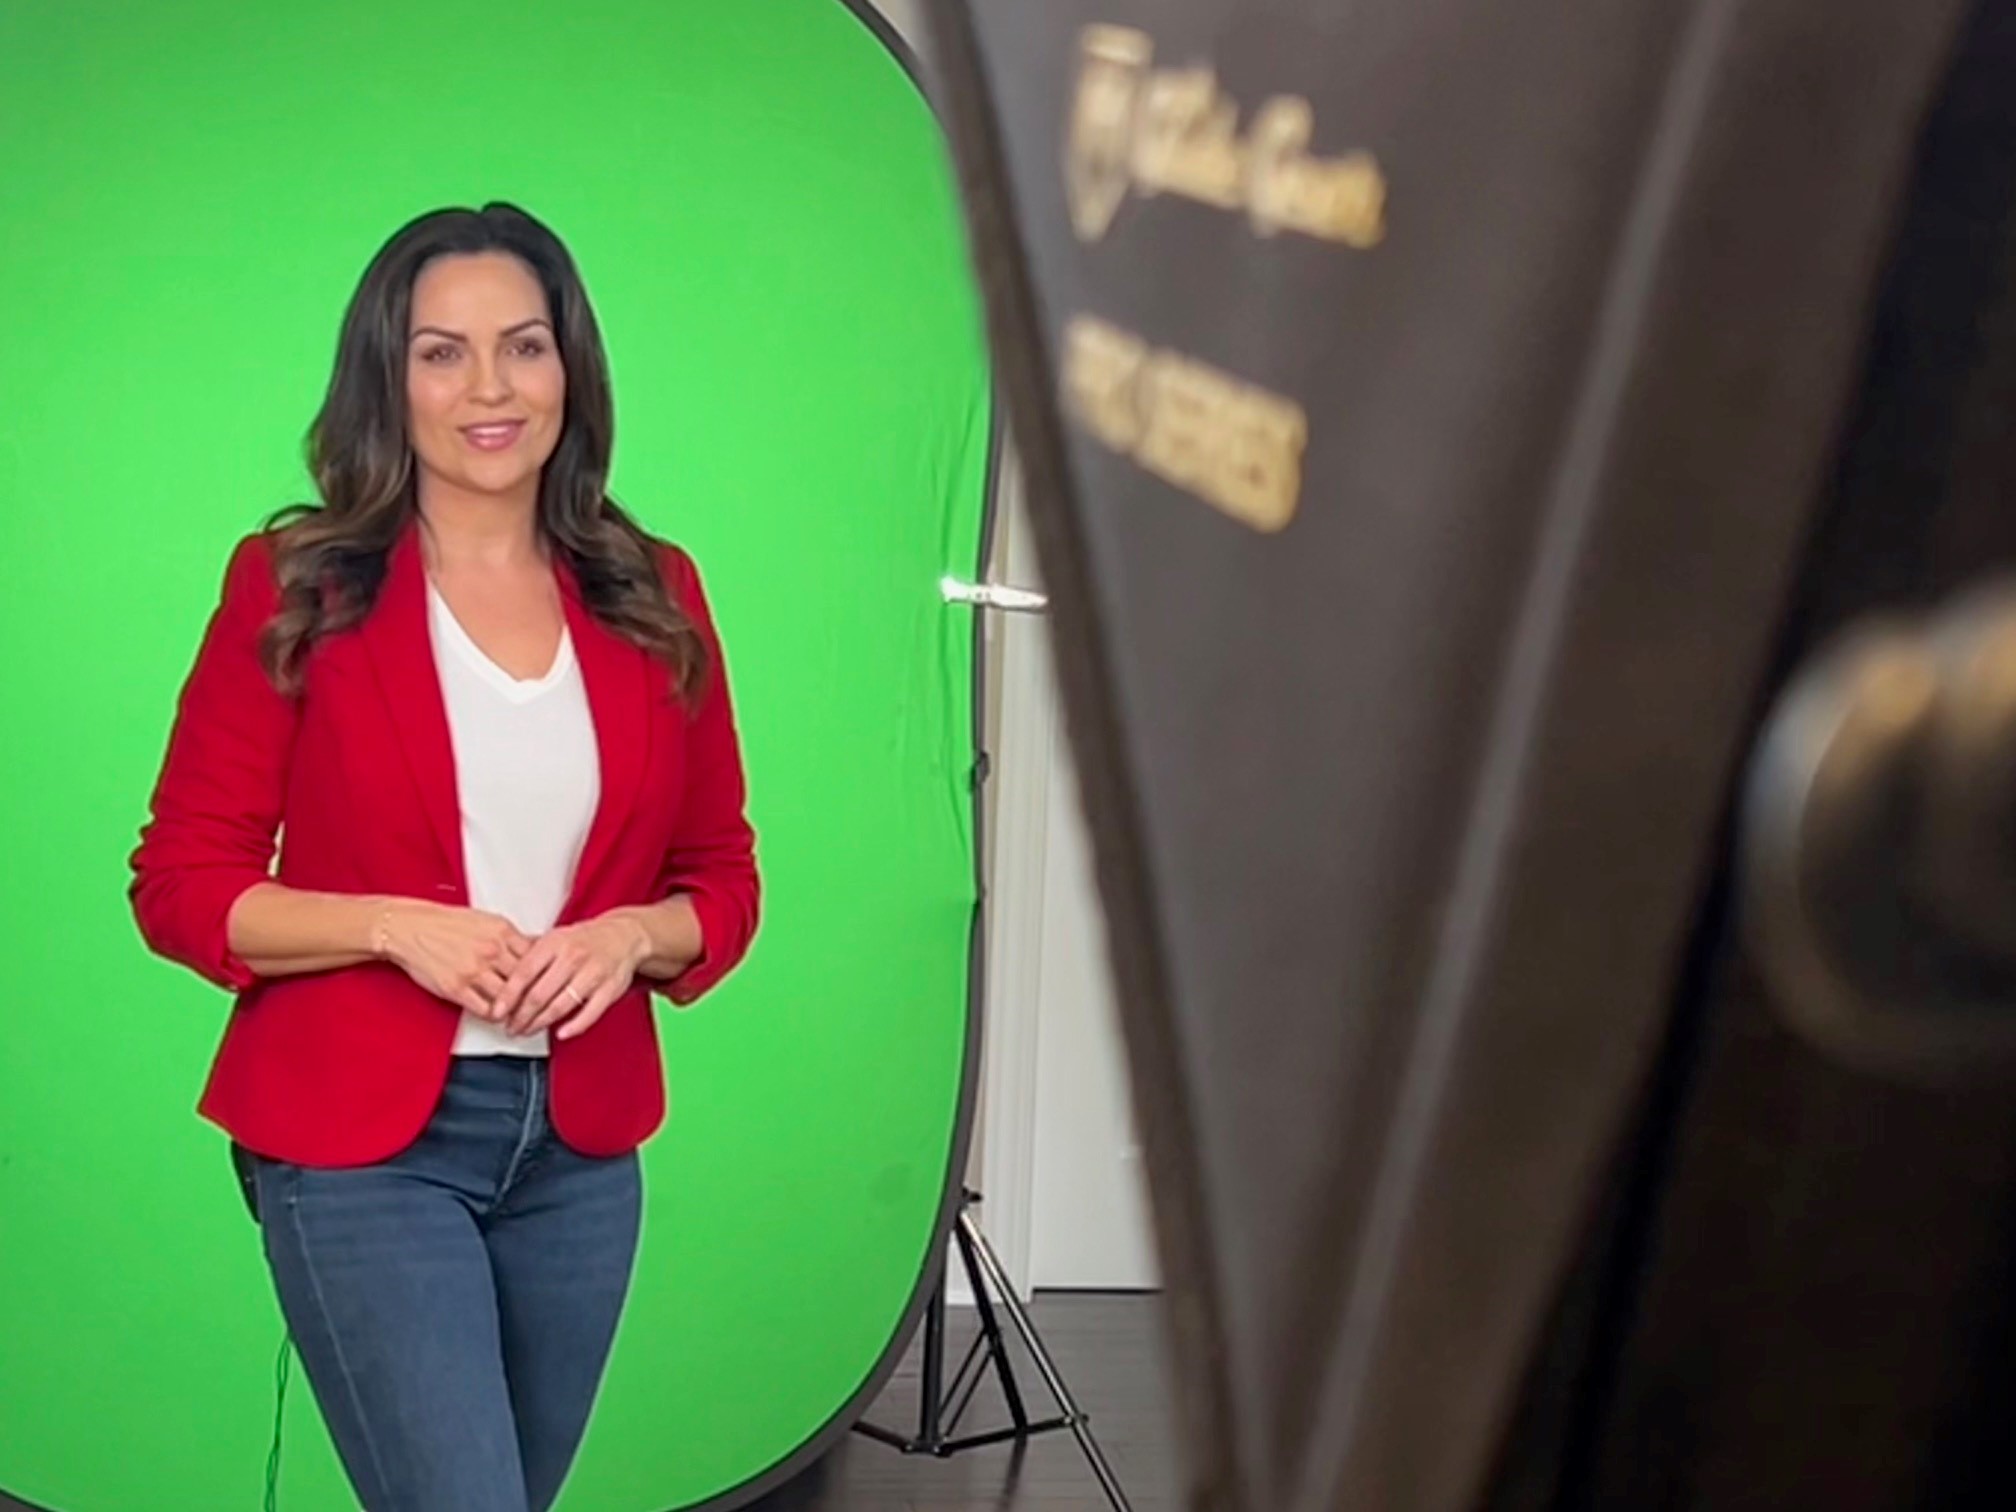 A lady with brunette hair smiling in front of a camera with a green screen behind her. She is wearing a red jacket